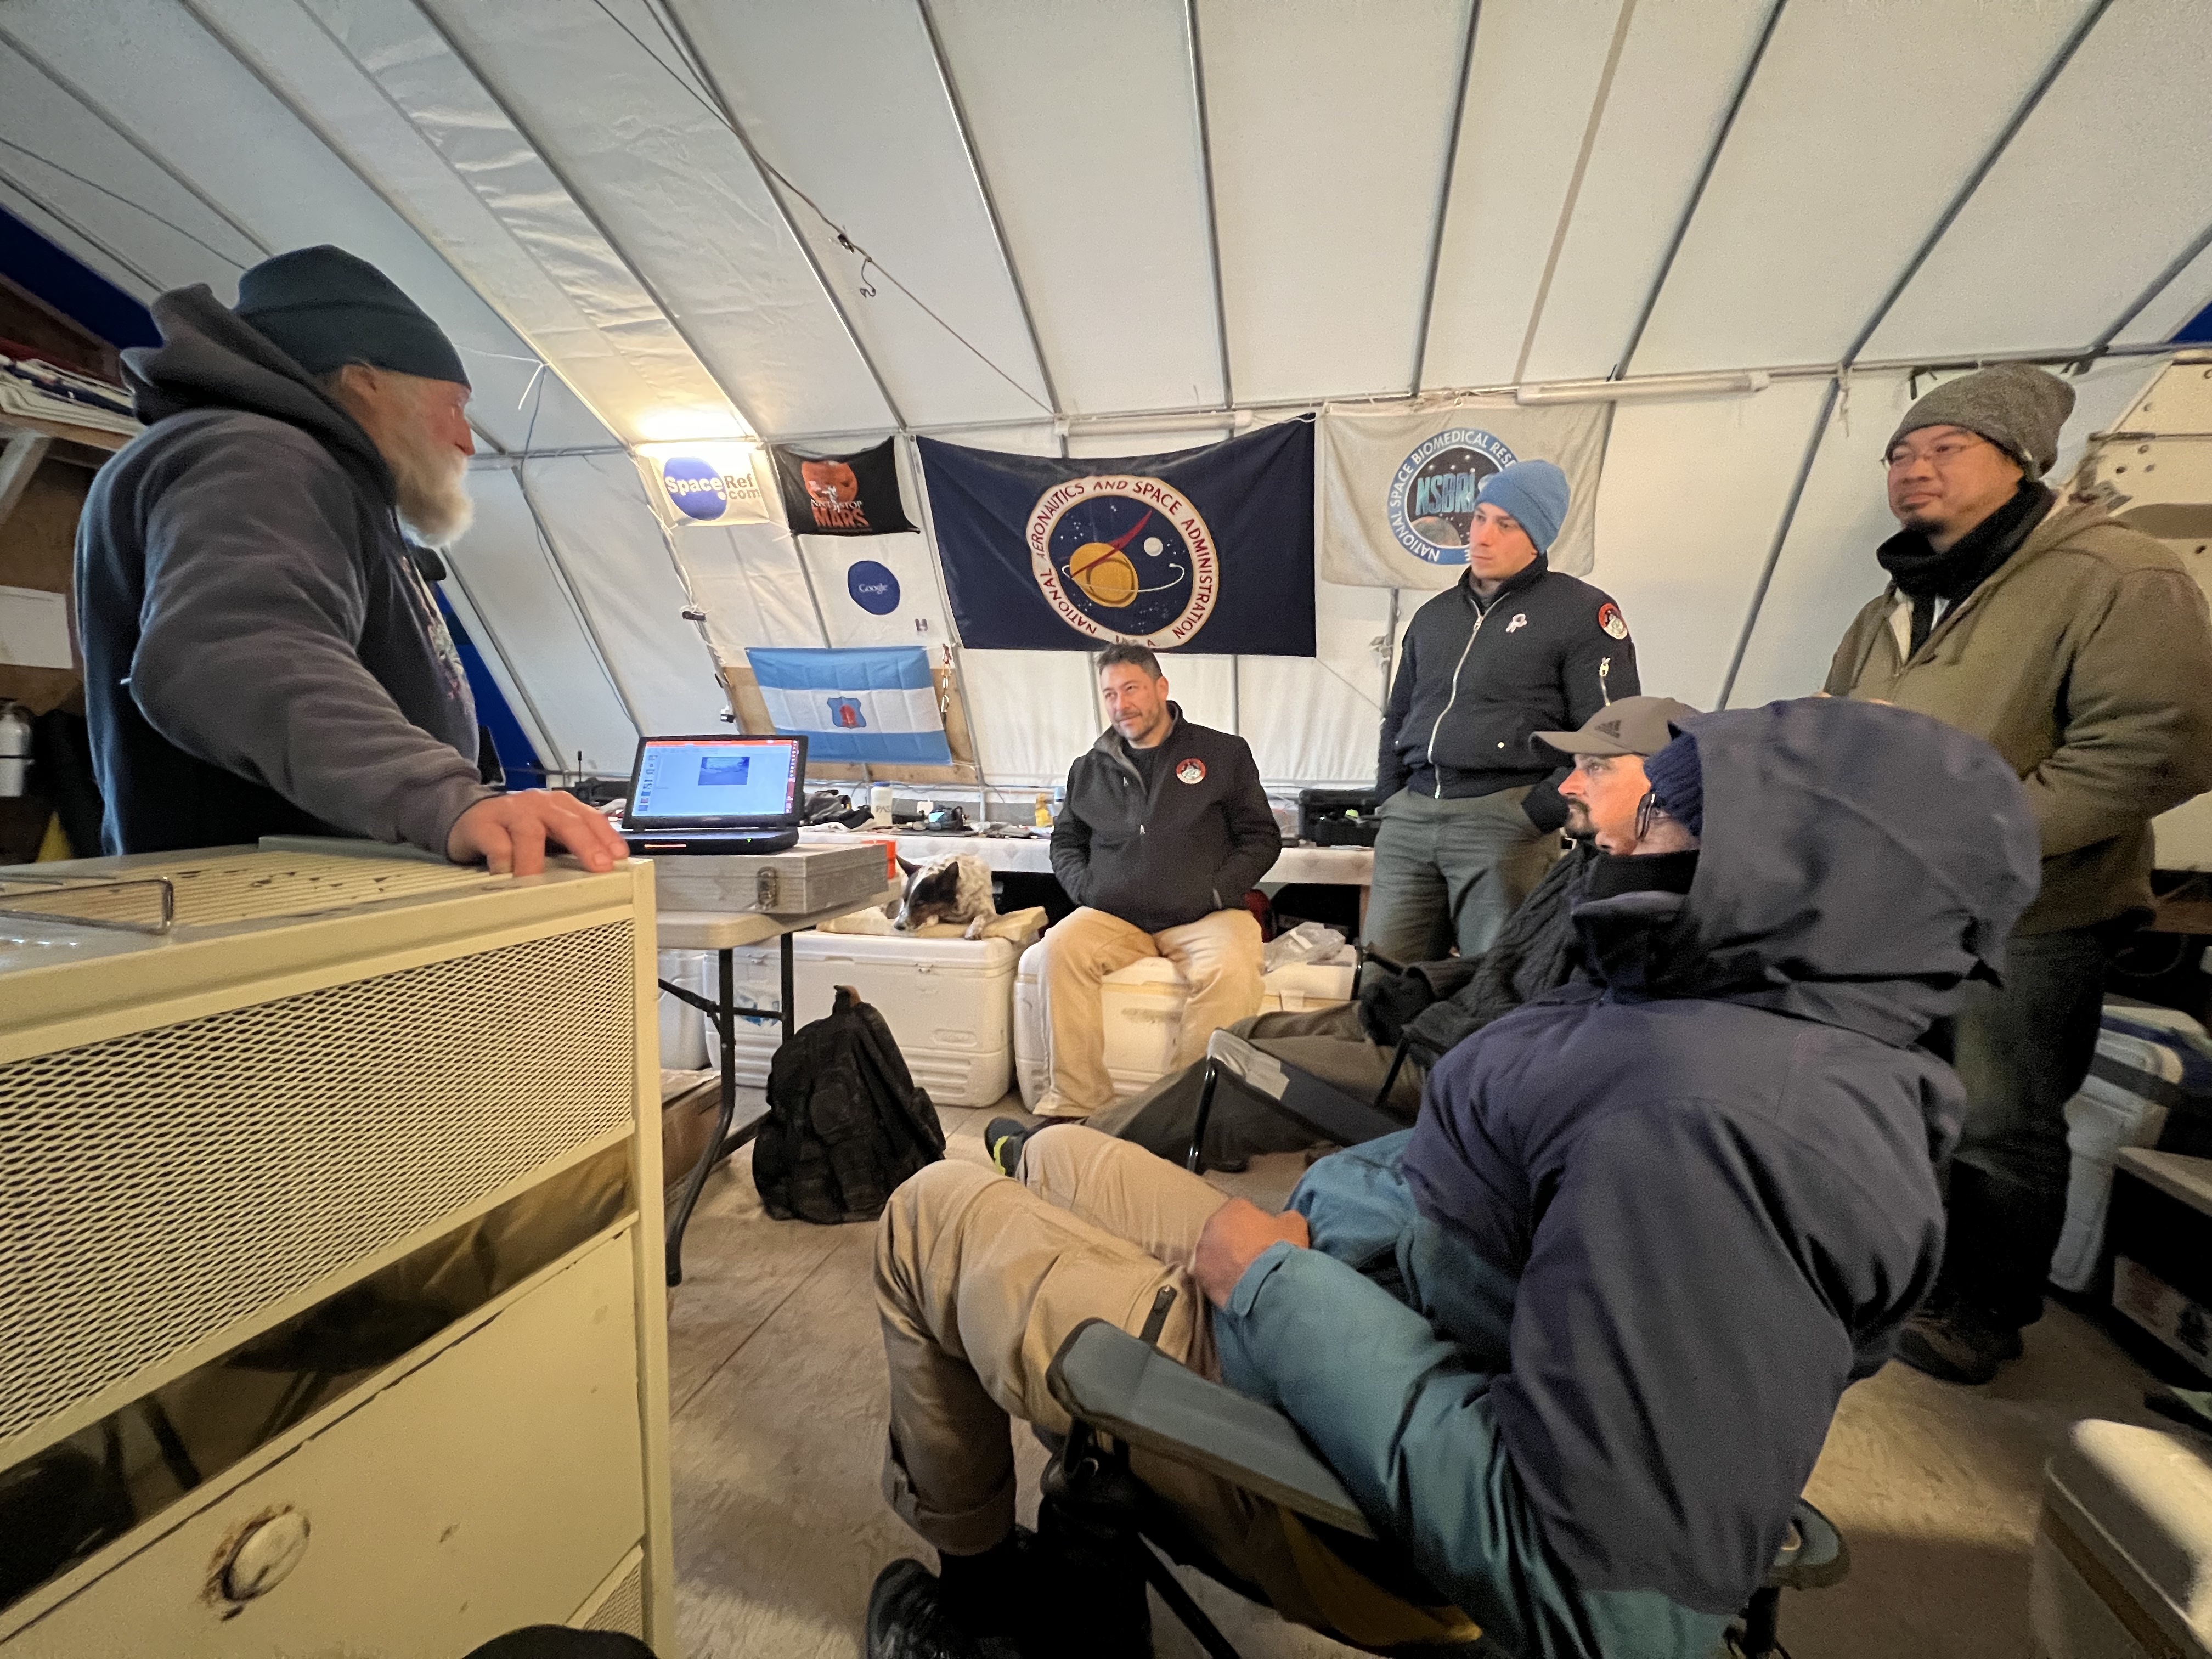 John Schutt, to left, presents to the team about finding meteorites in the Antarctic